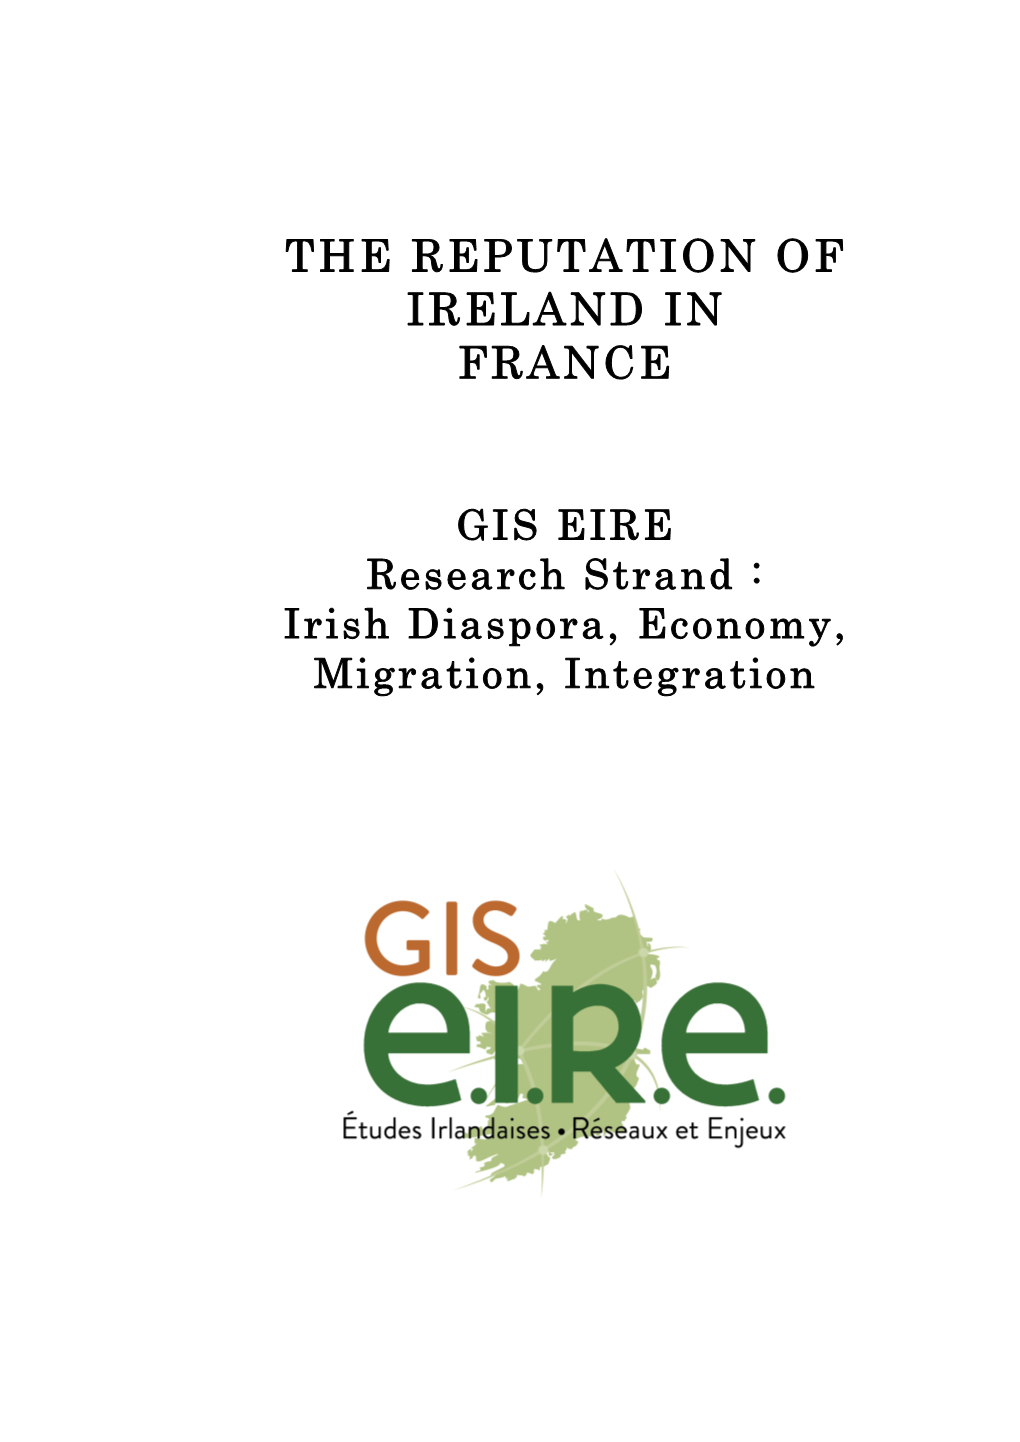 The Reputation of Ireland in France GIS EIRE (23 Dec 2020)